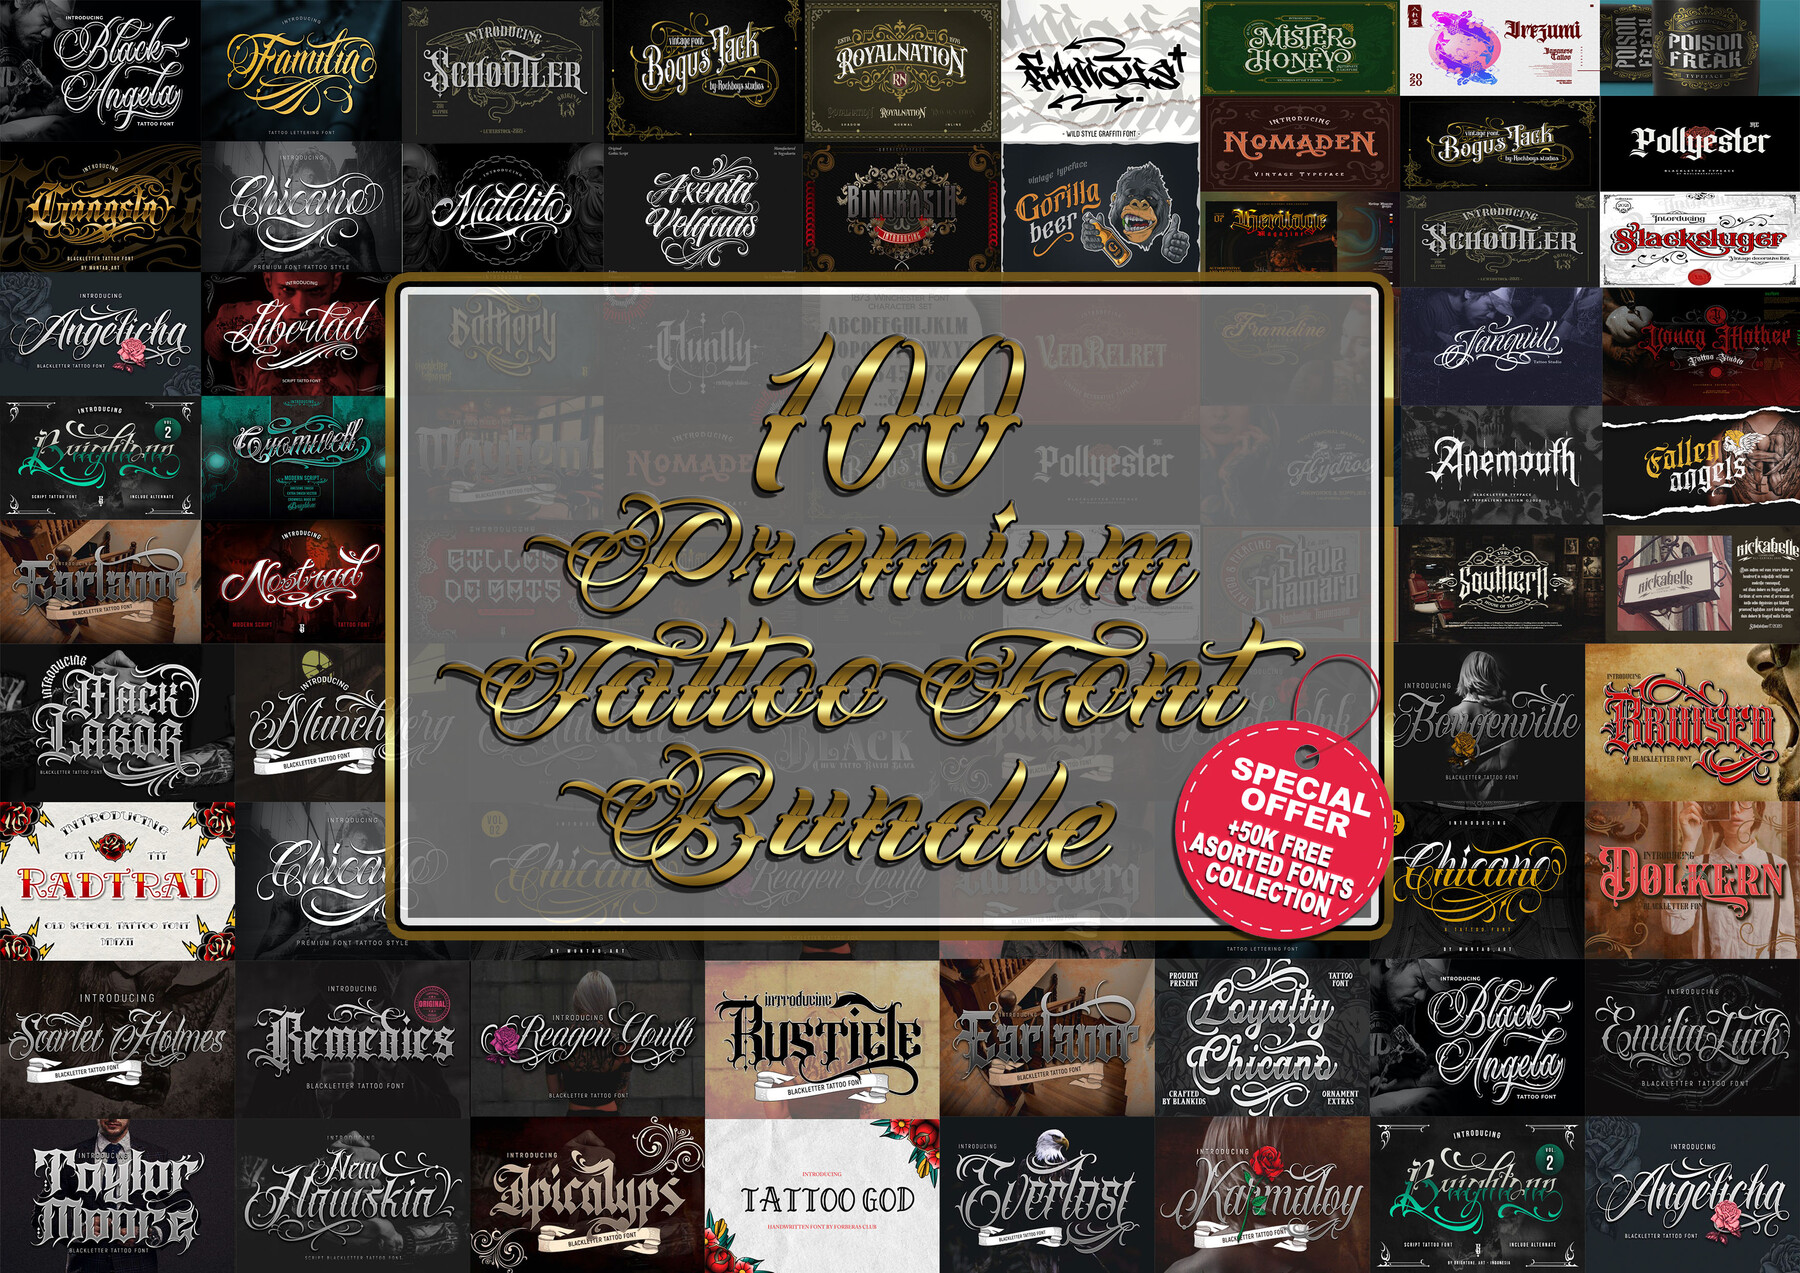 Tattoo ink • Compare (100+ products) find best prices »